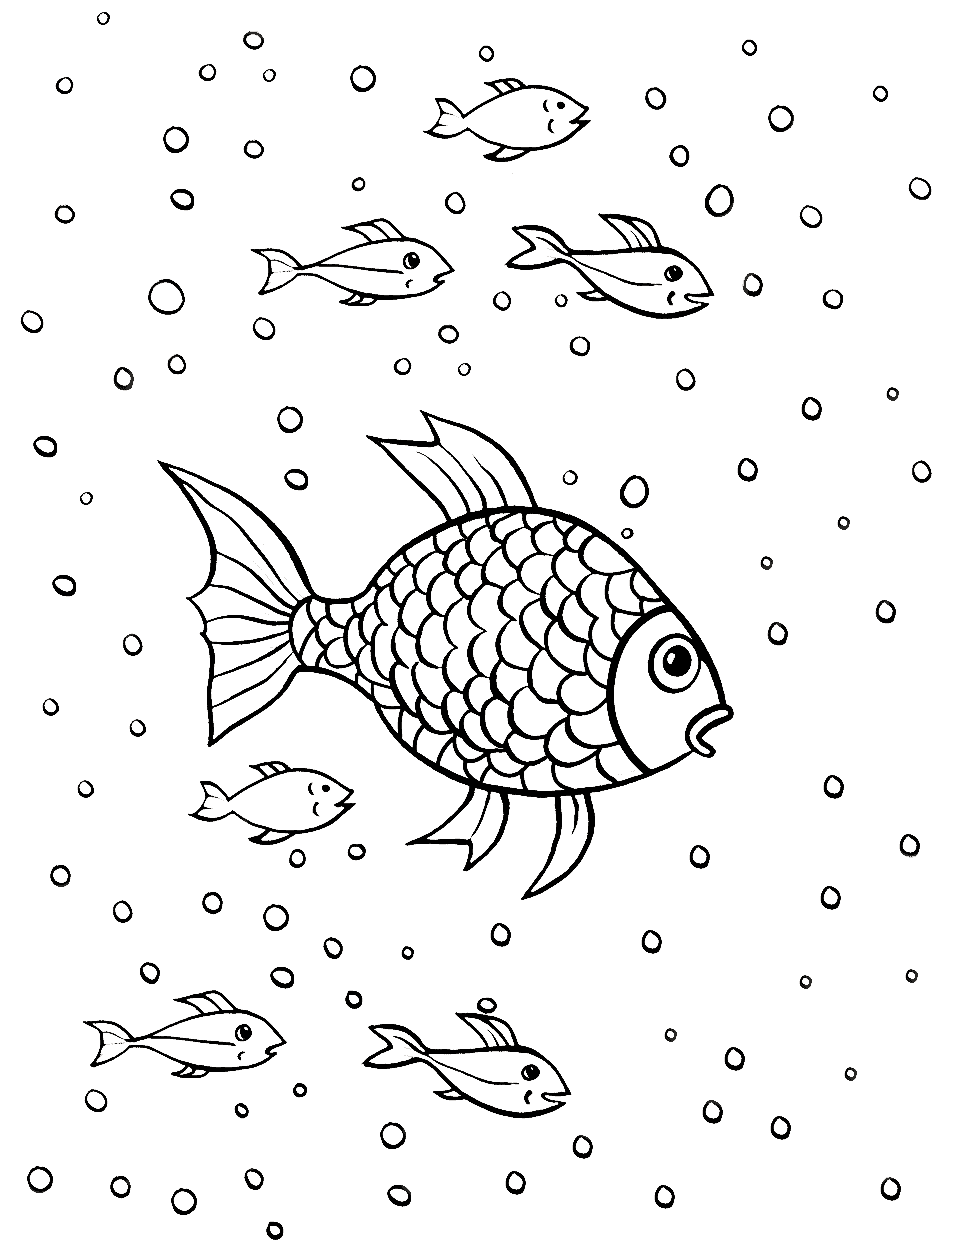 Rainbow Fish's Journey Fish Coloring Page - The famous Rainbow Fish, with shiny scales.